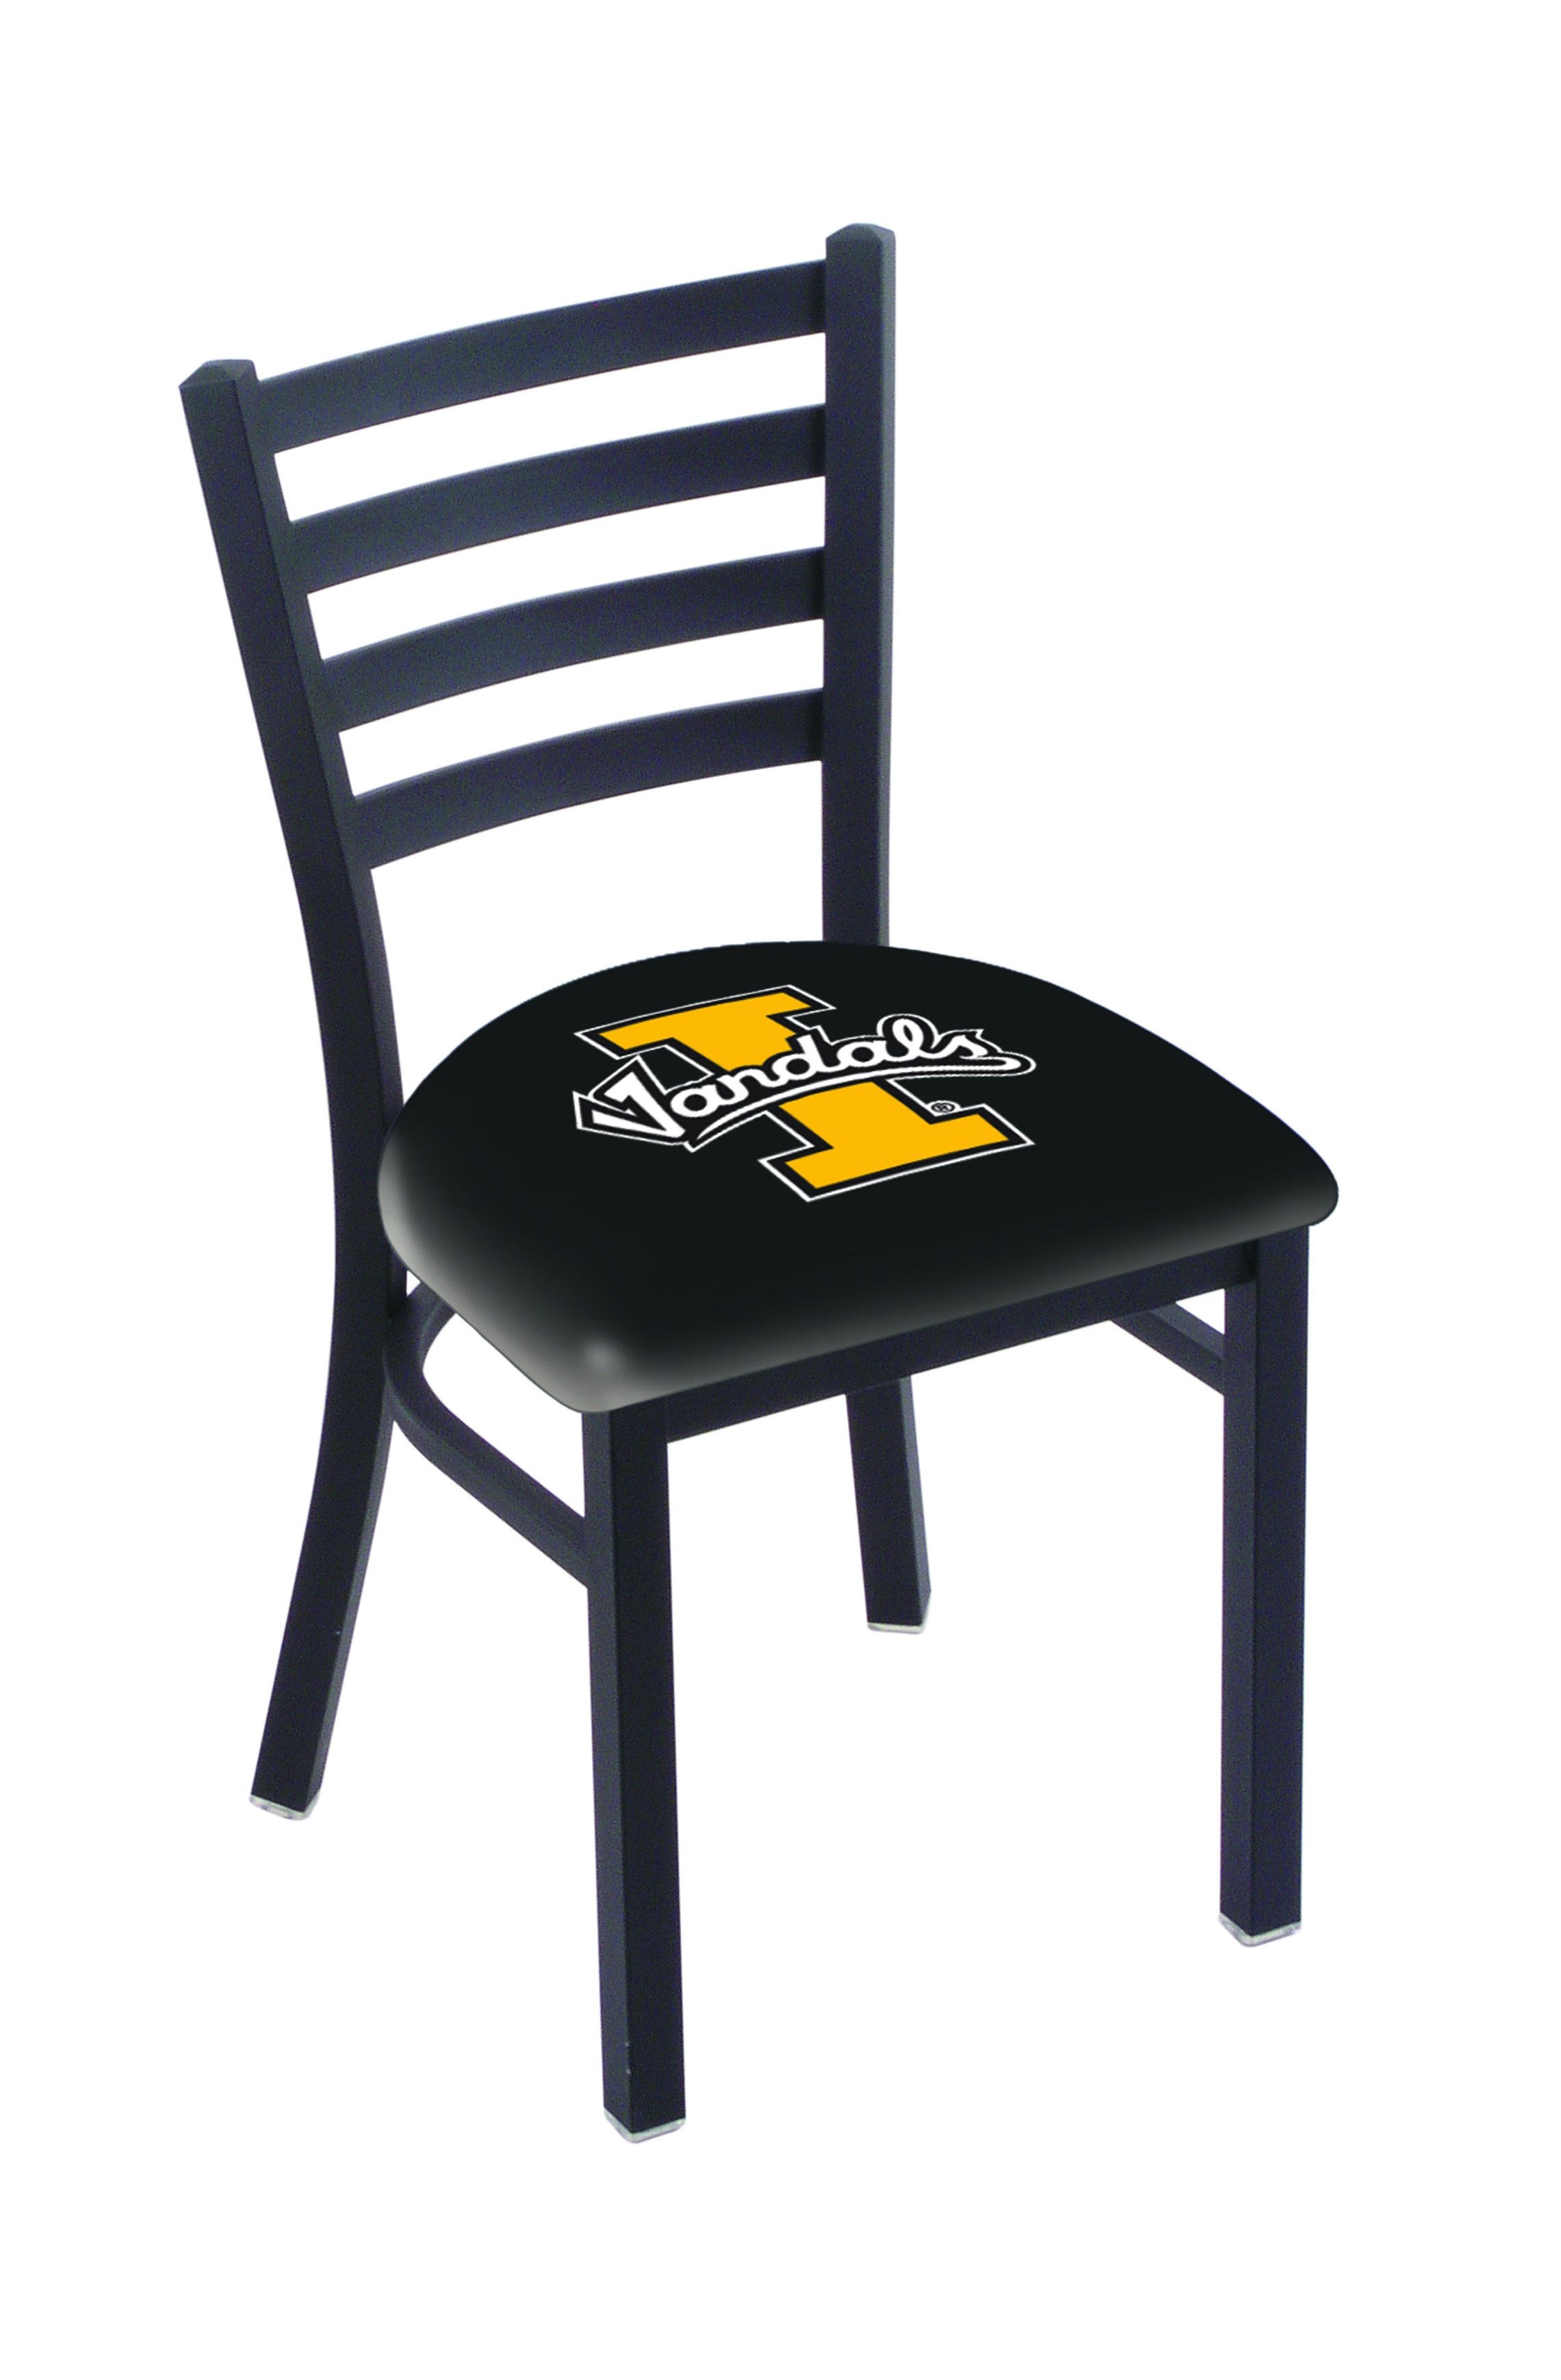 Picture of Holland Bar Stool L00418IdahoU 18 in. Idaho Chair with Vandals Logo